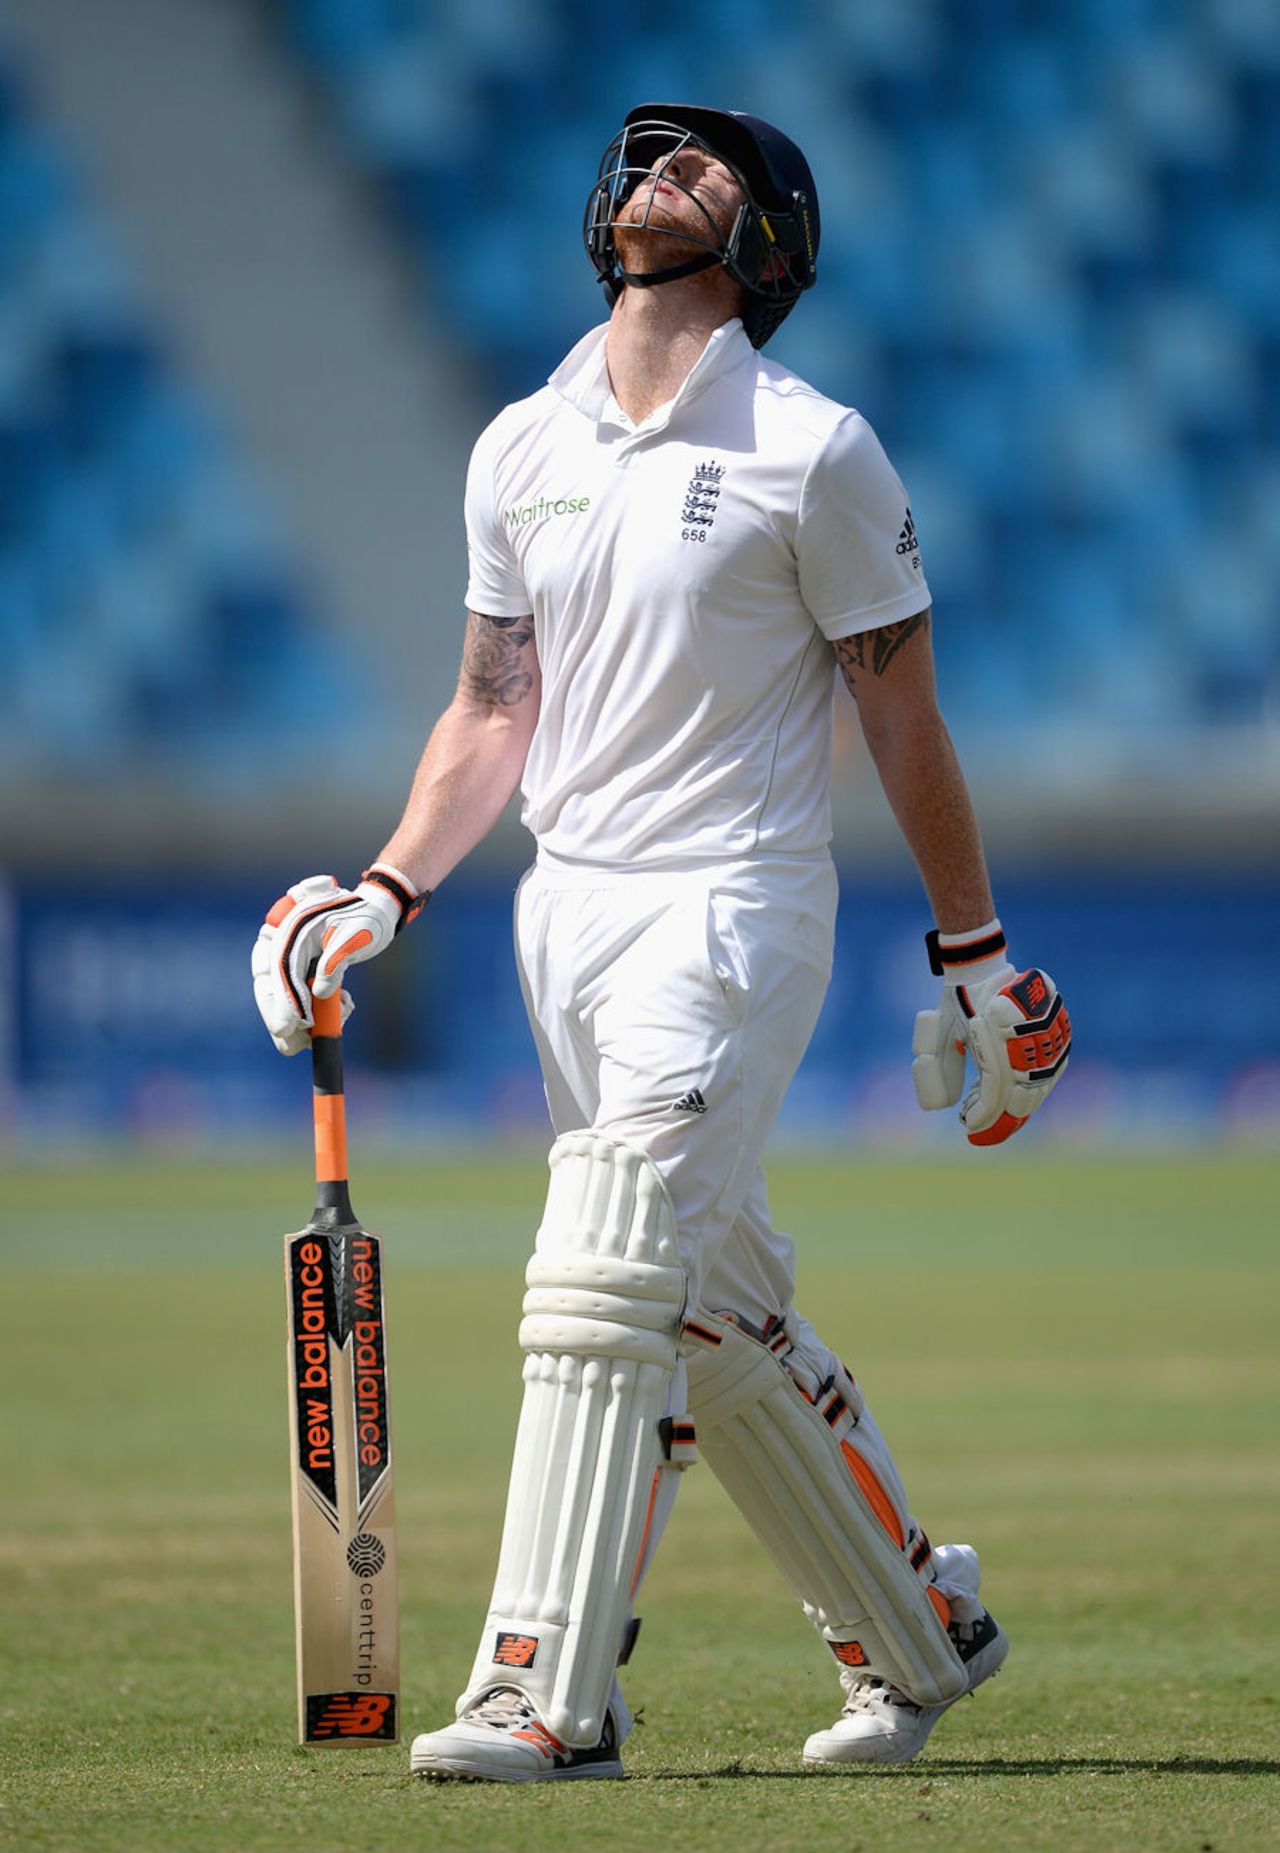 Ben Stokes is full of self-recrimination after his dismissal, Pakistan v England, 2nd Test, Dubai, 5th day, October 26, 2015